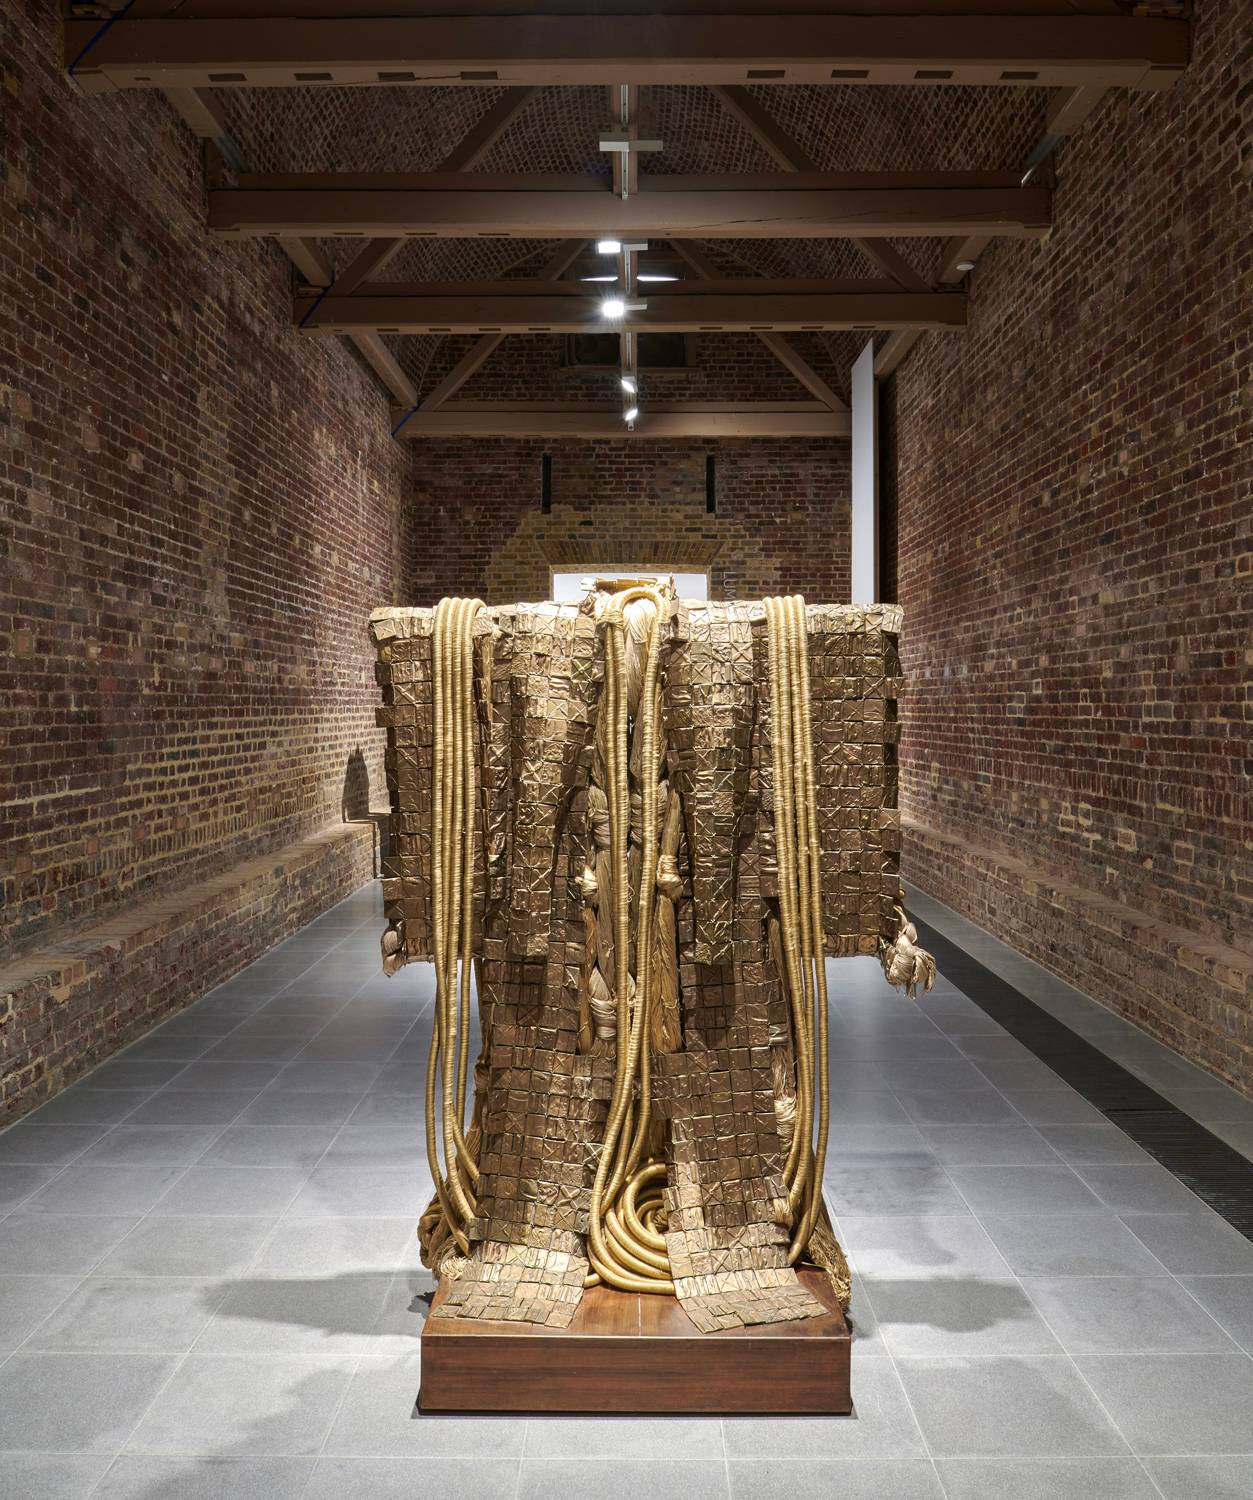 Installation view of Barbara Chase-Riboud’s exhibition ‘Infinite Folds’ at Serpentine North, London, 2022. Photographs by Jo Underhill. Courtesy of the artist and Serpentine.